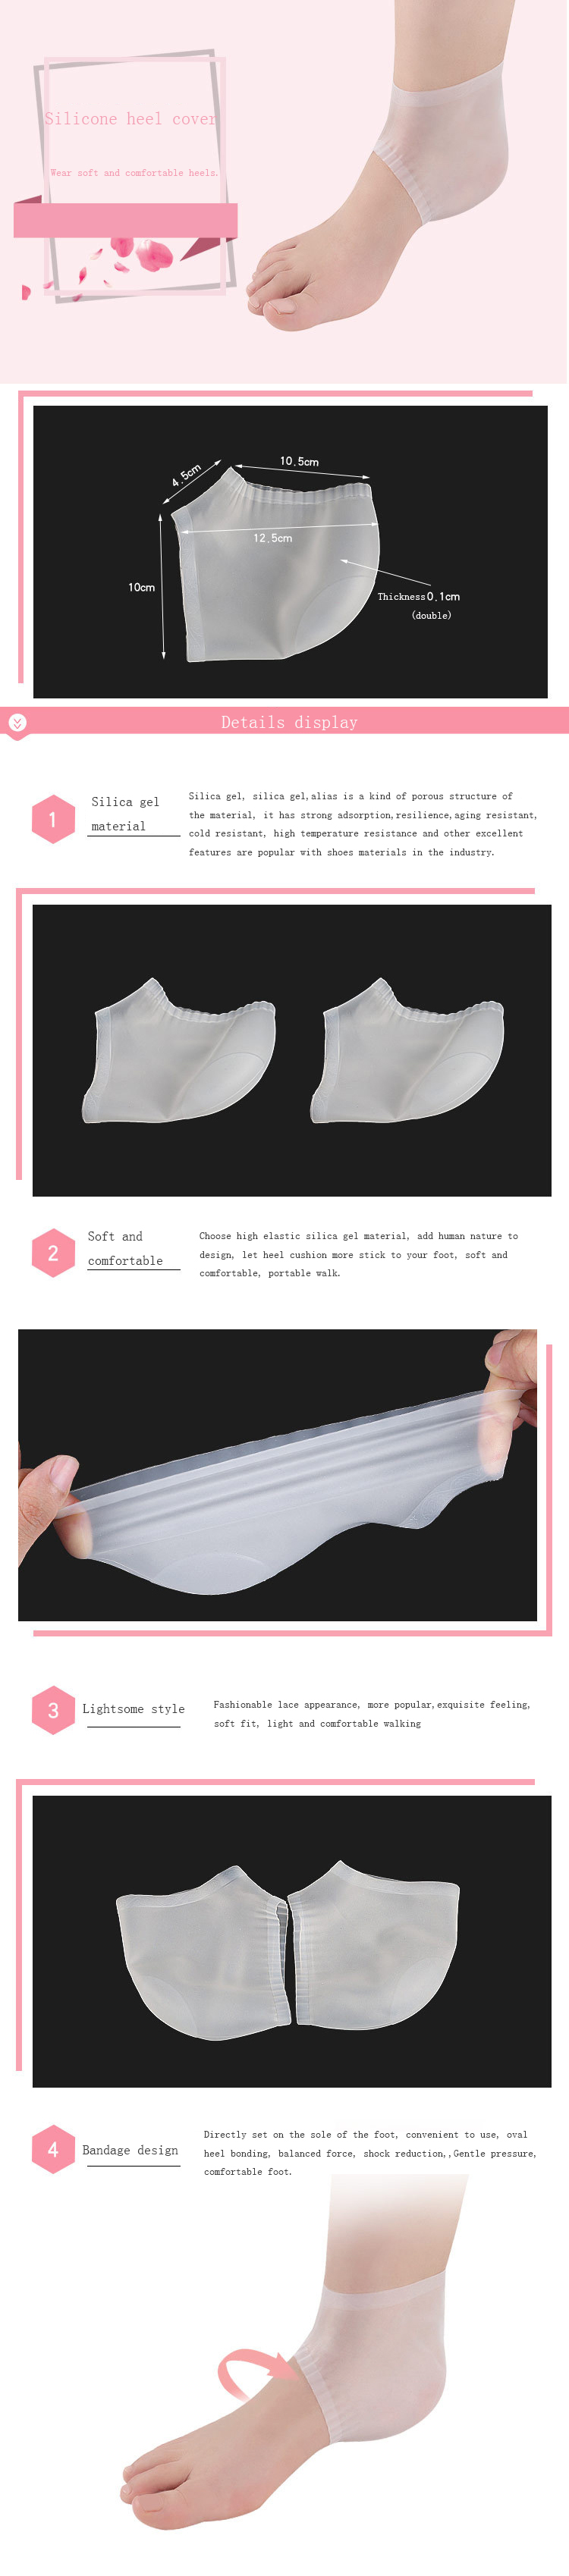 PD-305-Soft-Comfortable-Bandage-Design-Silicone-Pad-Heel-Cover-1306283